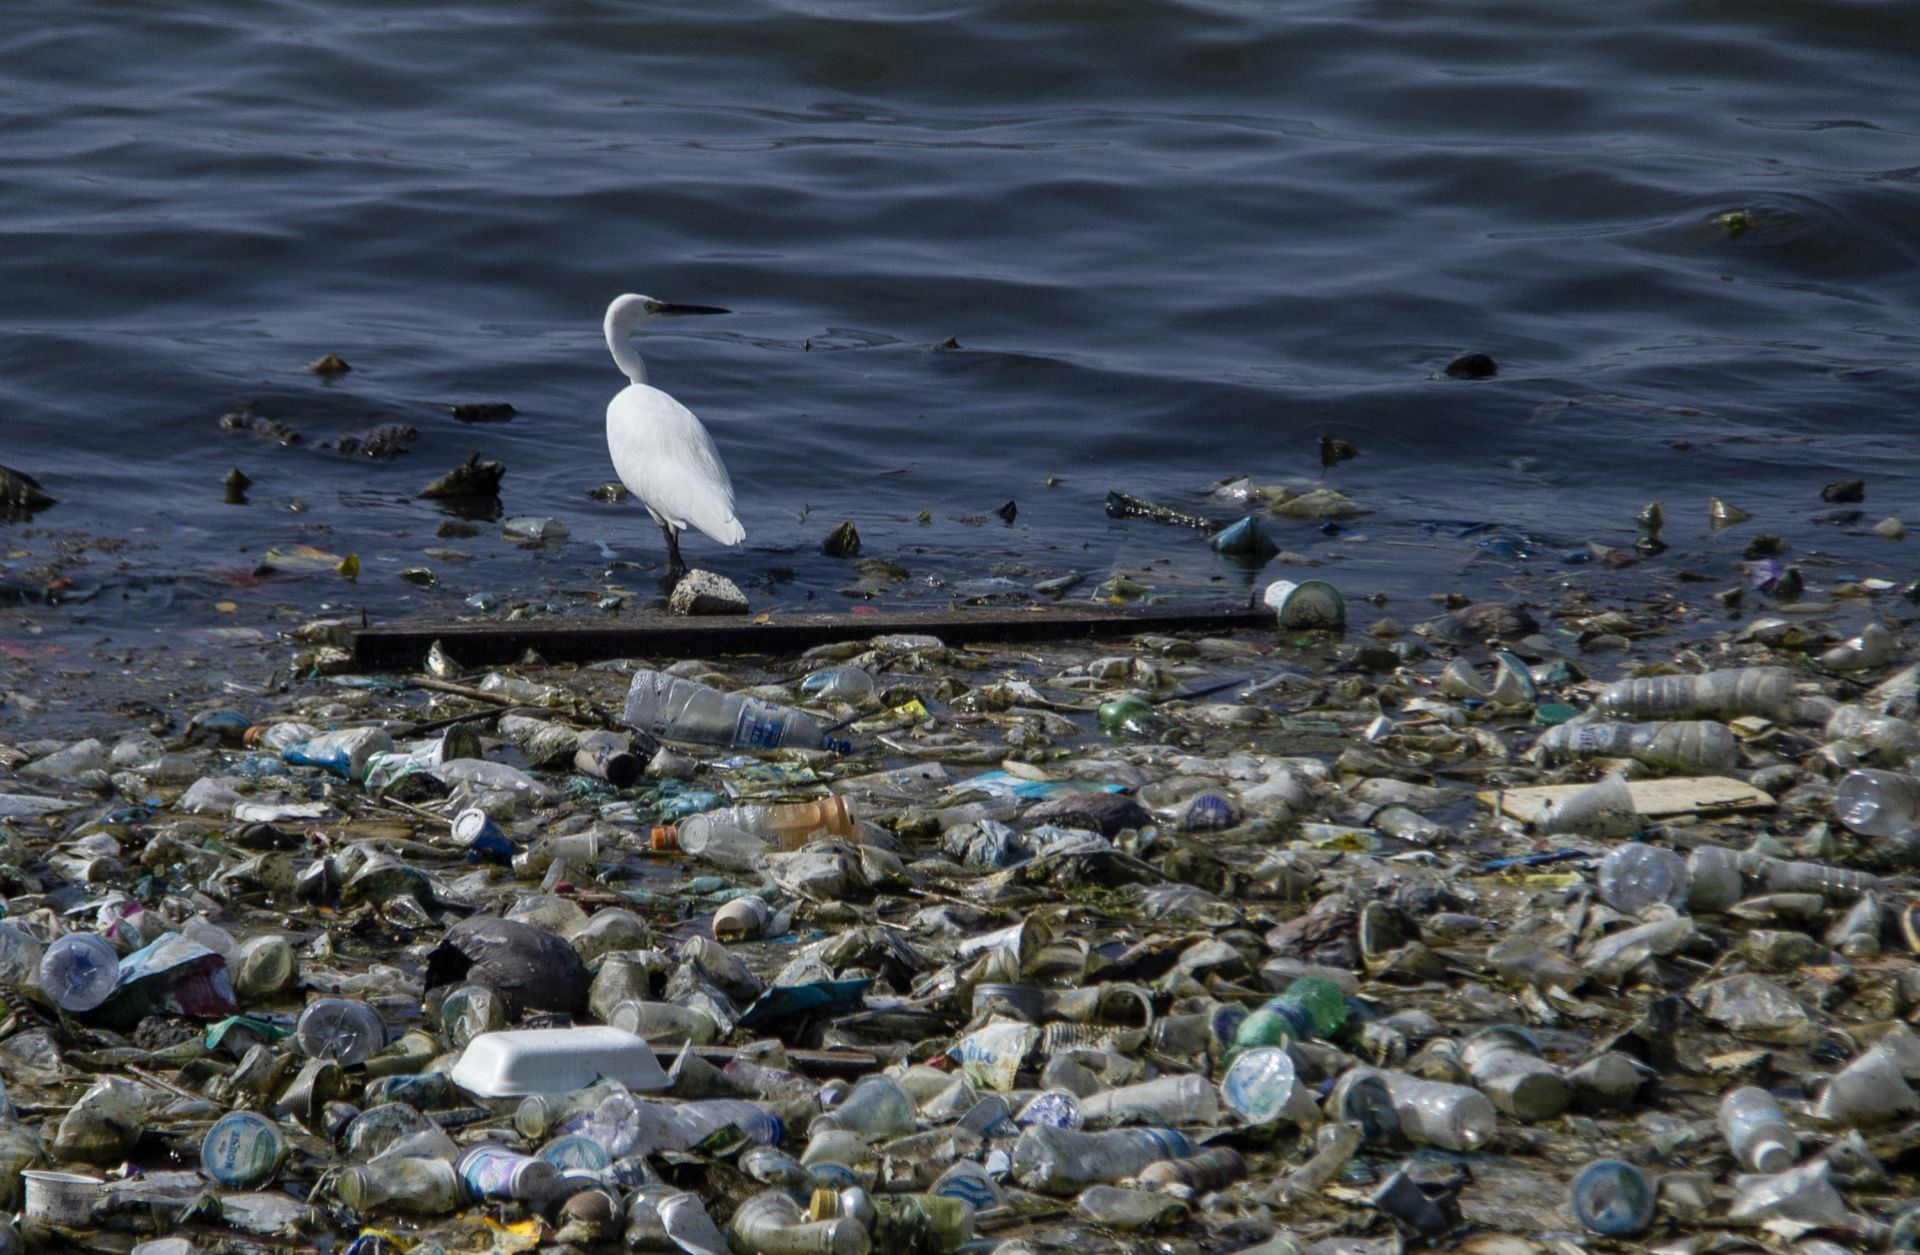 Plastic waste litters the shore of a reservoir in Lhokseumawe, Indonesia, on June 28, 2019.